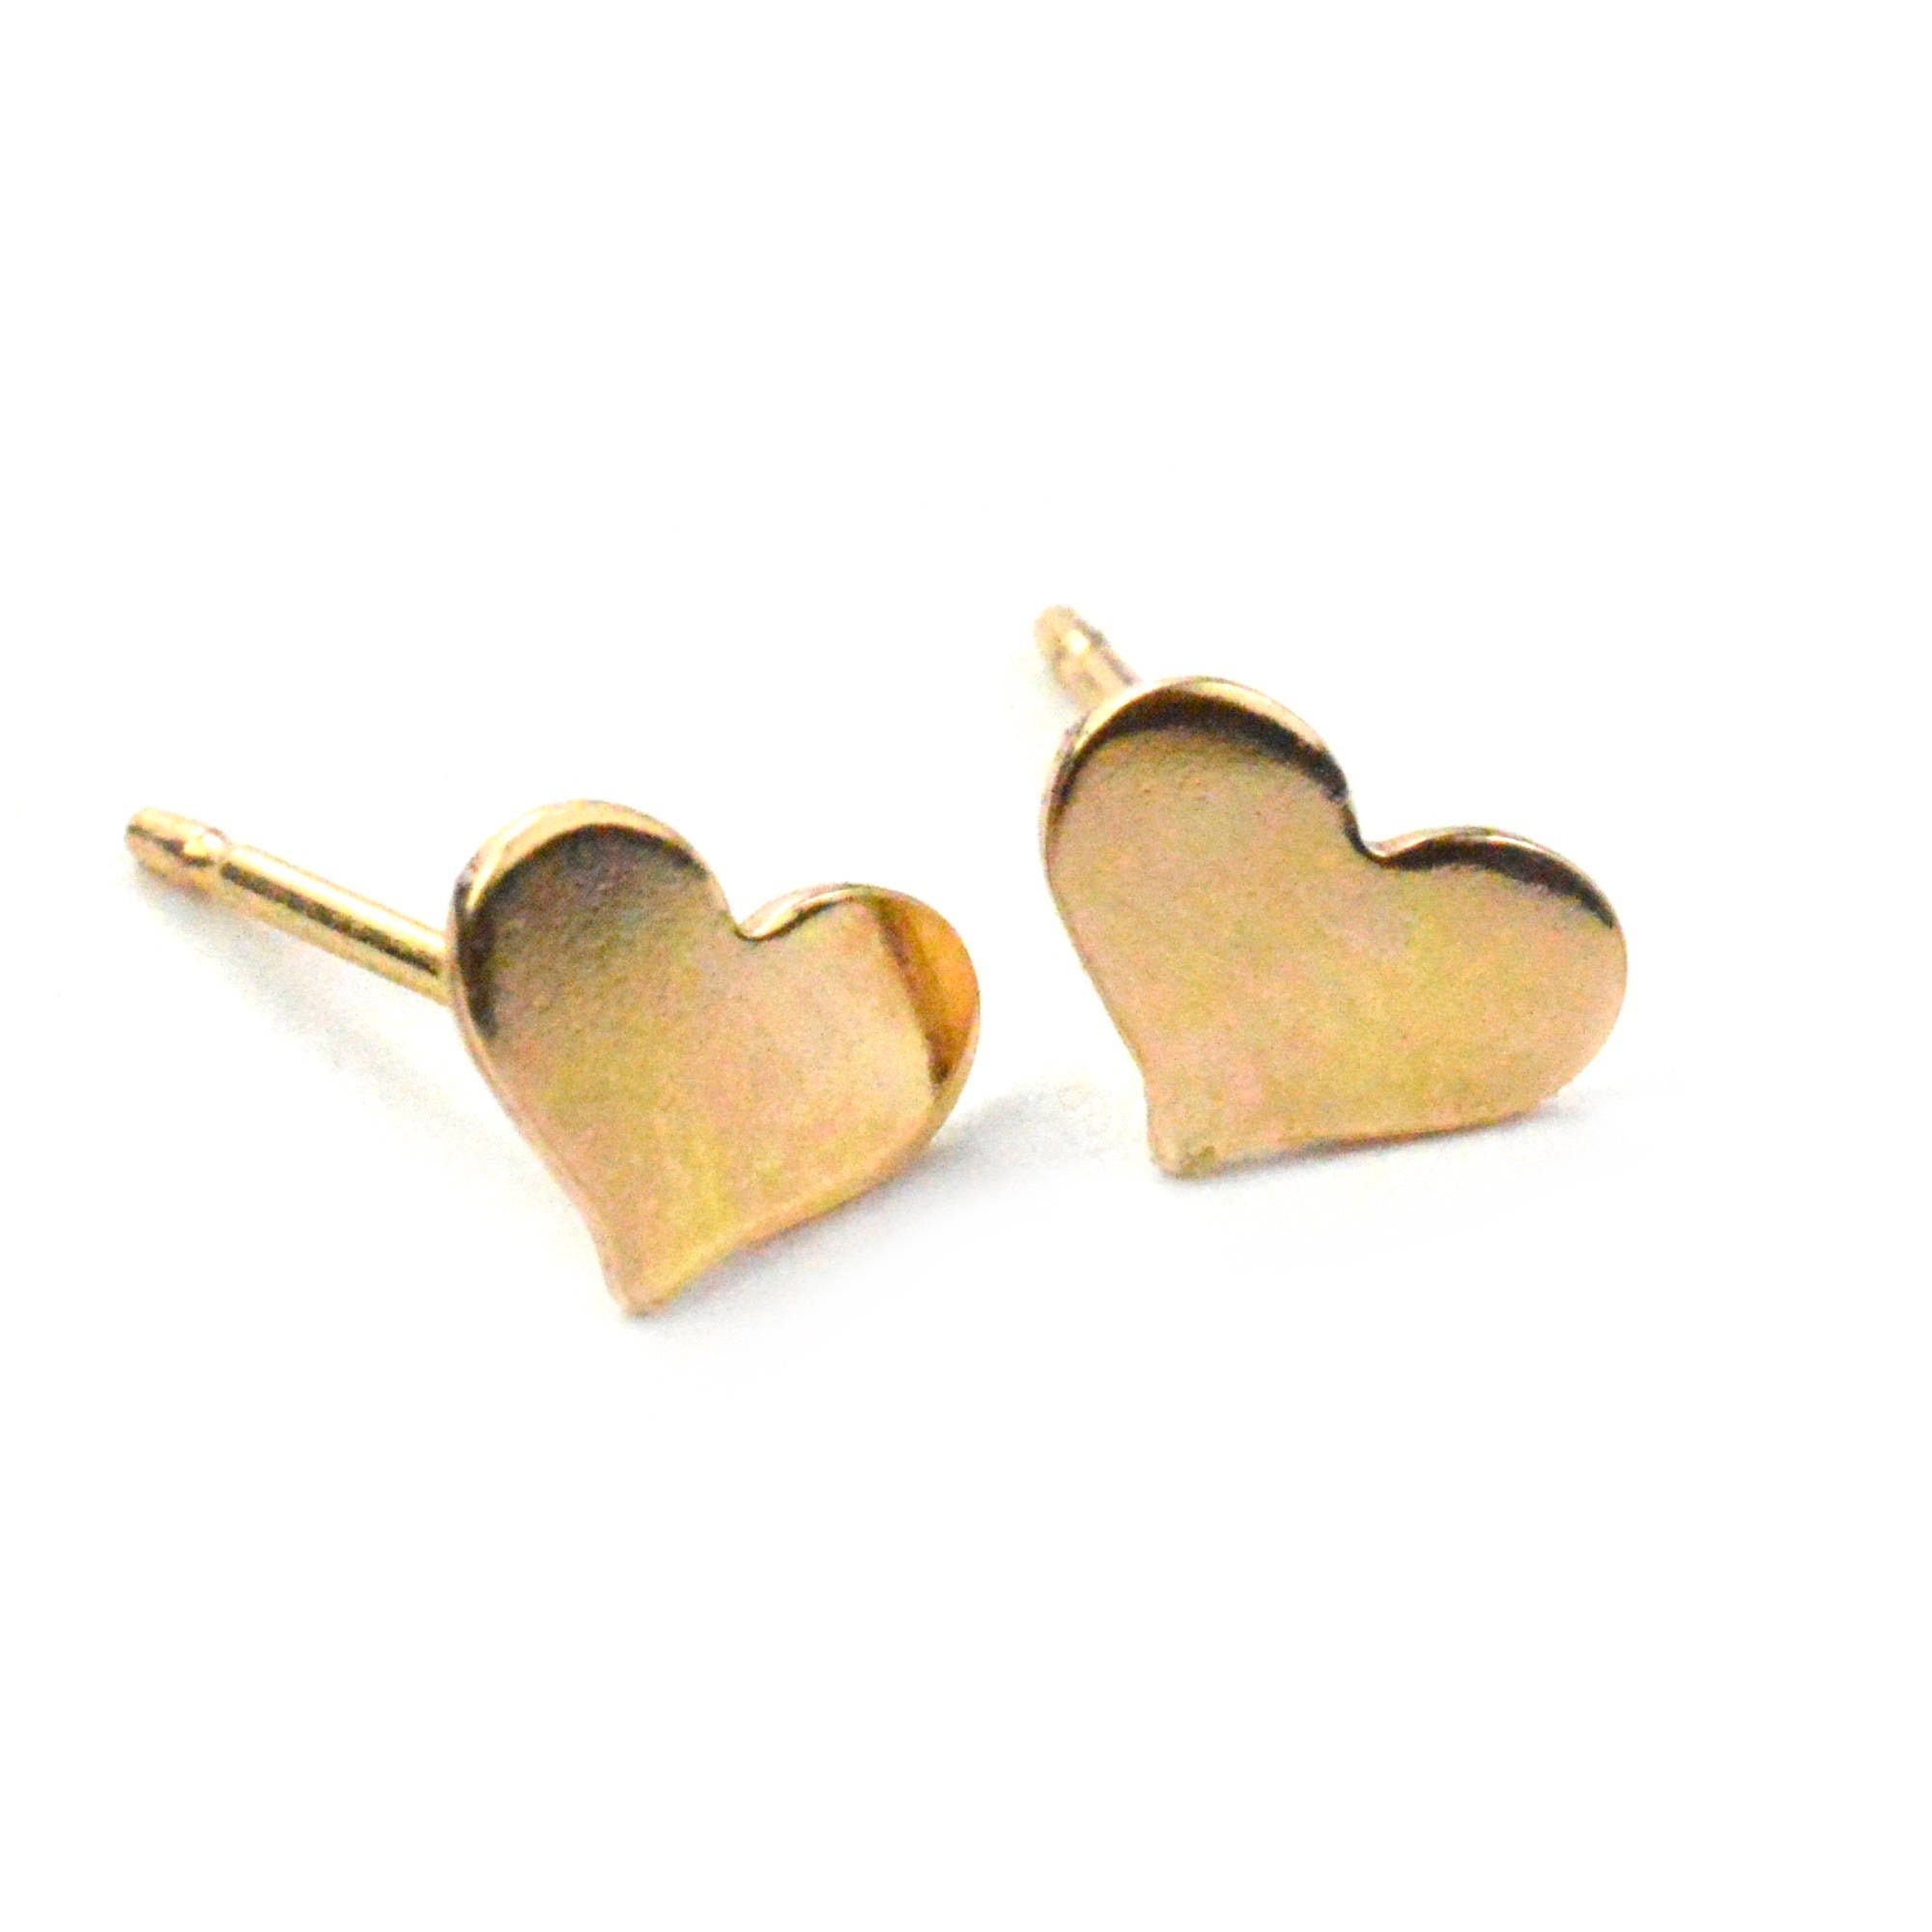 Delicate Tiny 14k Gold Plated Heart Studs Valentine Gift For Her Sterling Silver Daily Earrings Minimalist Silver Open Heart Earrings